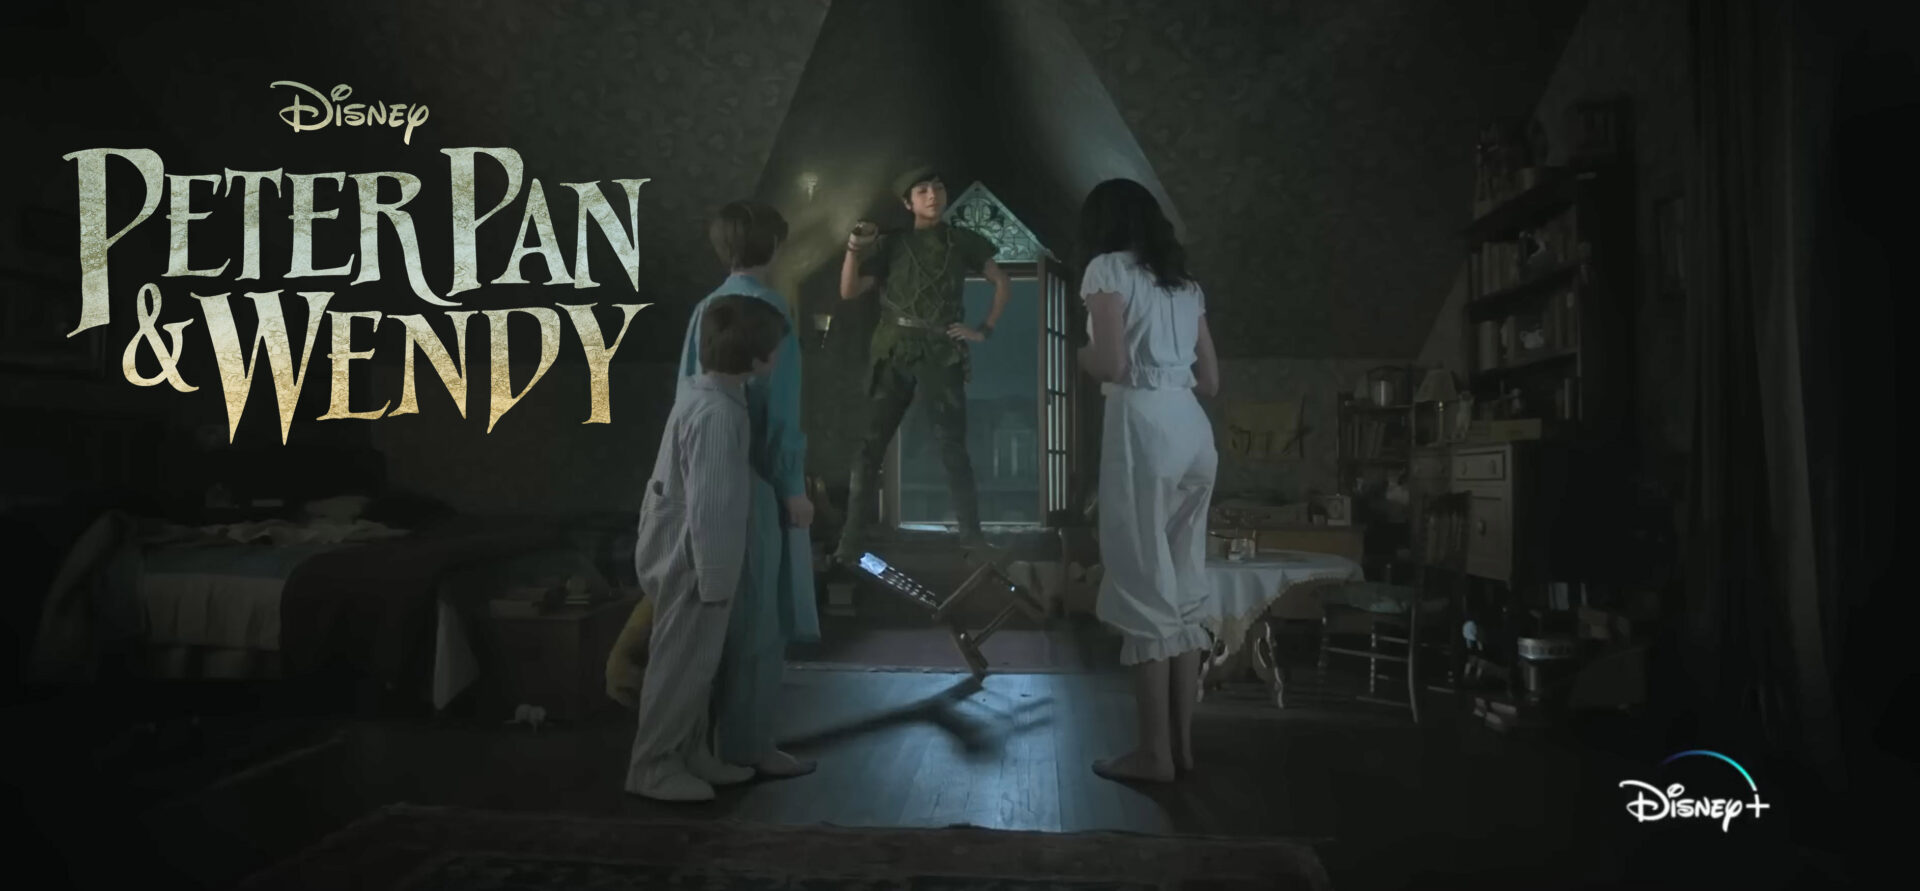 TRAILER 'Peter Pan' Travels To Neverland With Wendy, John and Michael